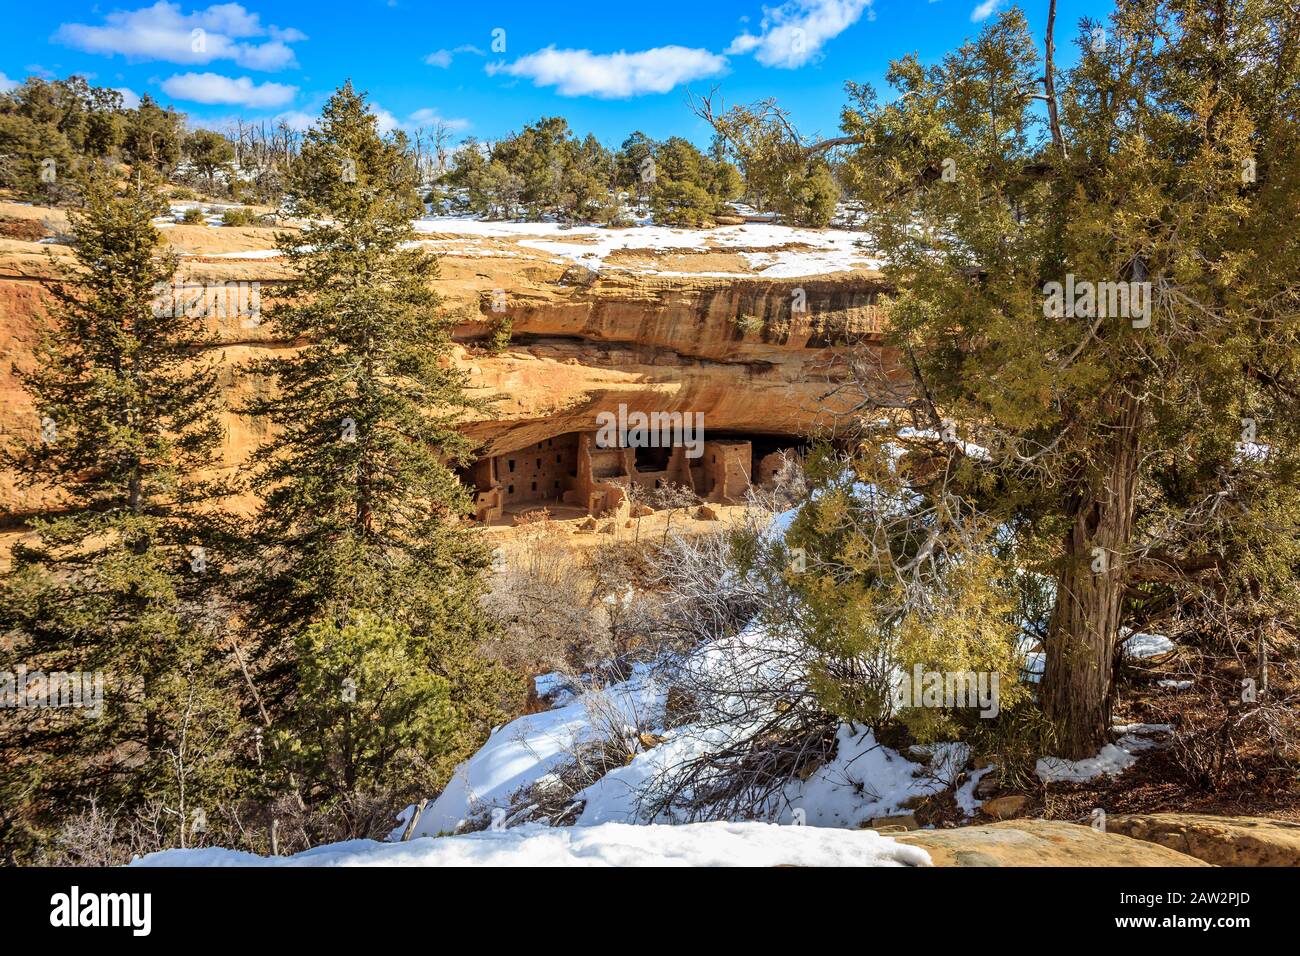 The first view of Spruce Tree House in Mesa Verde National Park, Colorado, USA Stock Photo